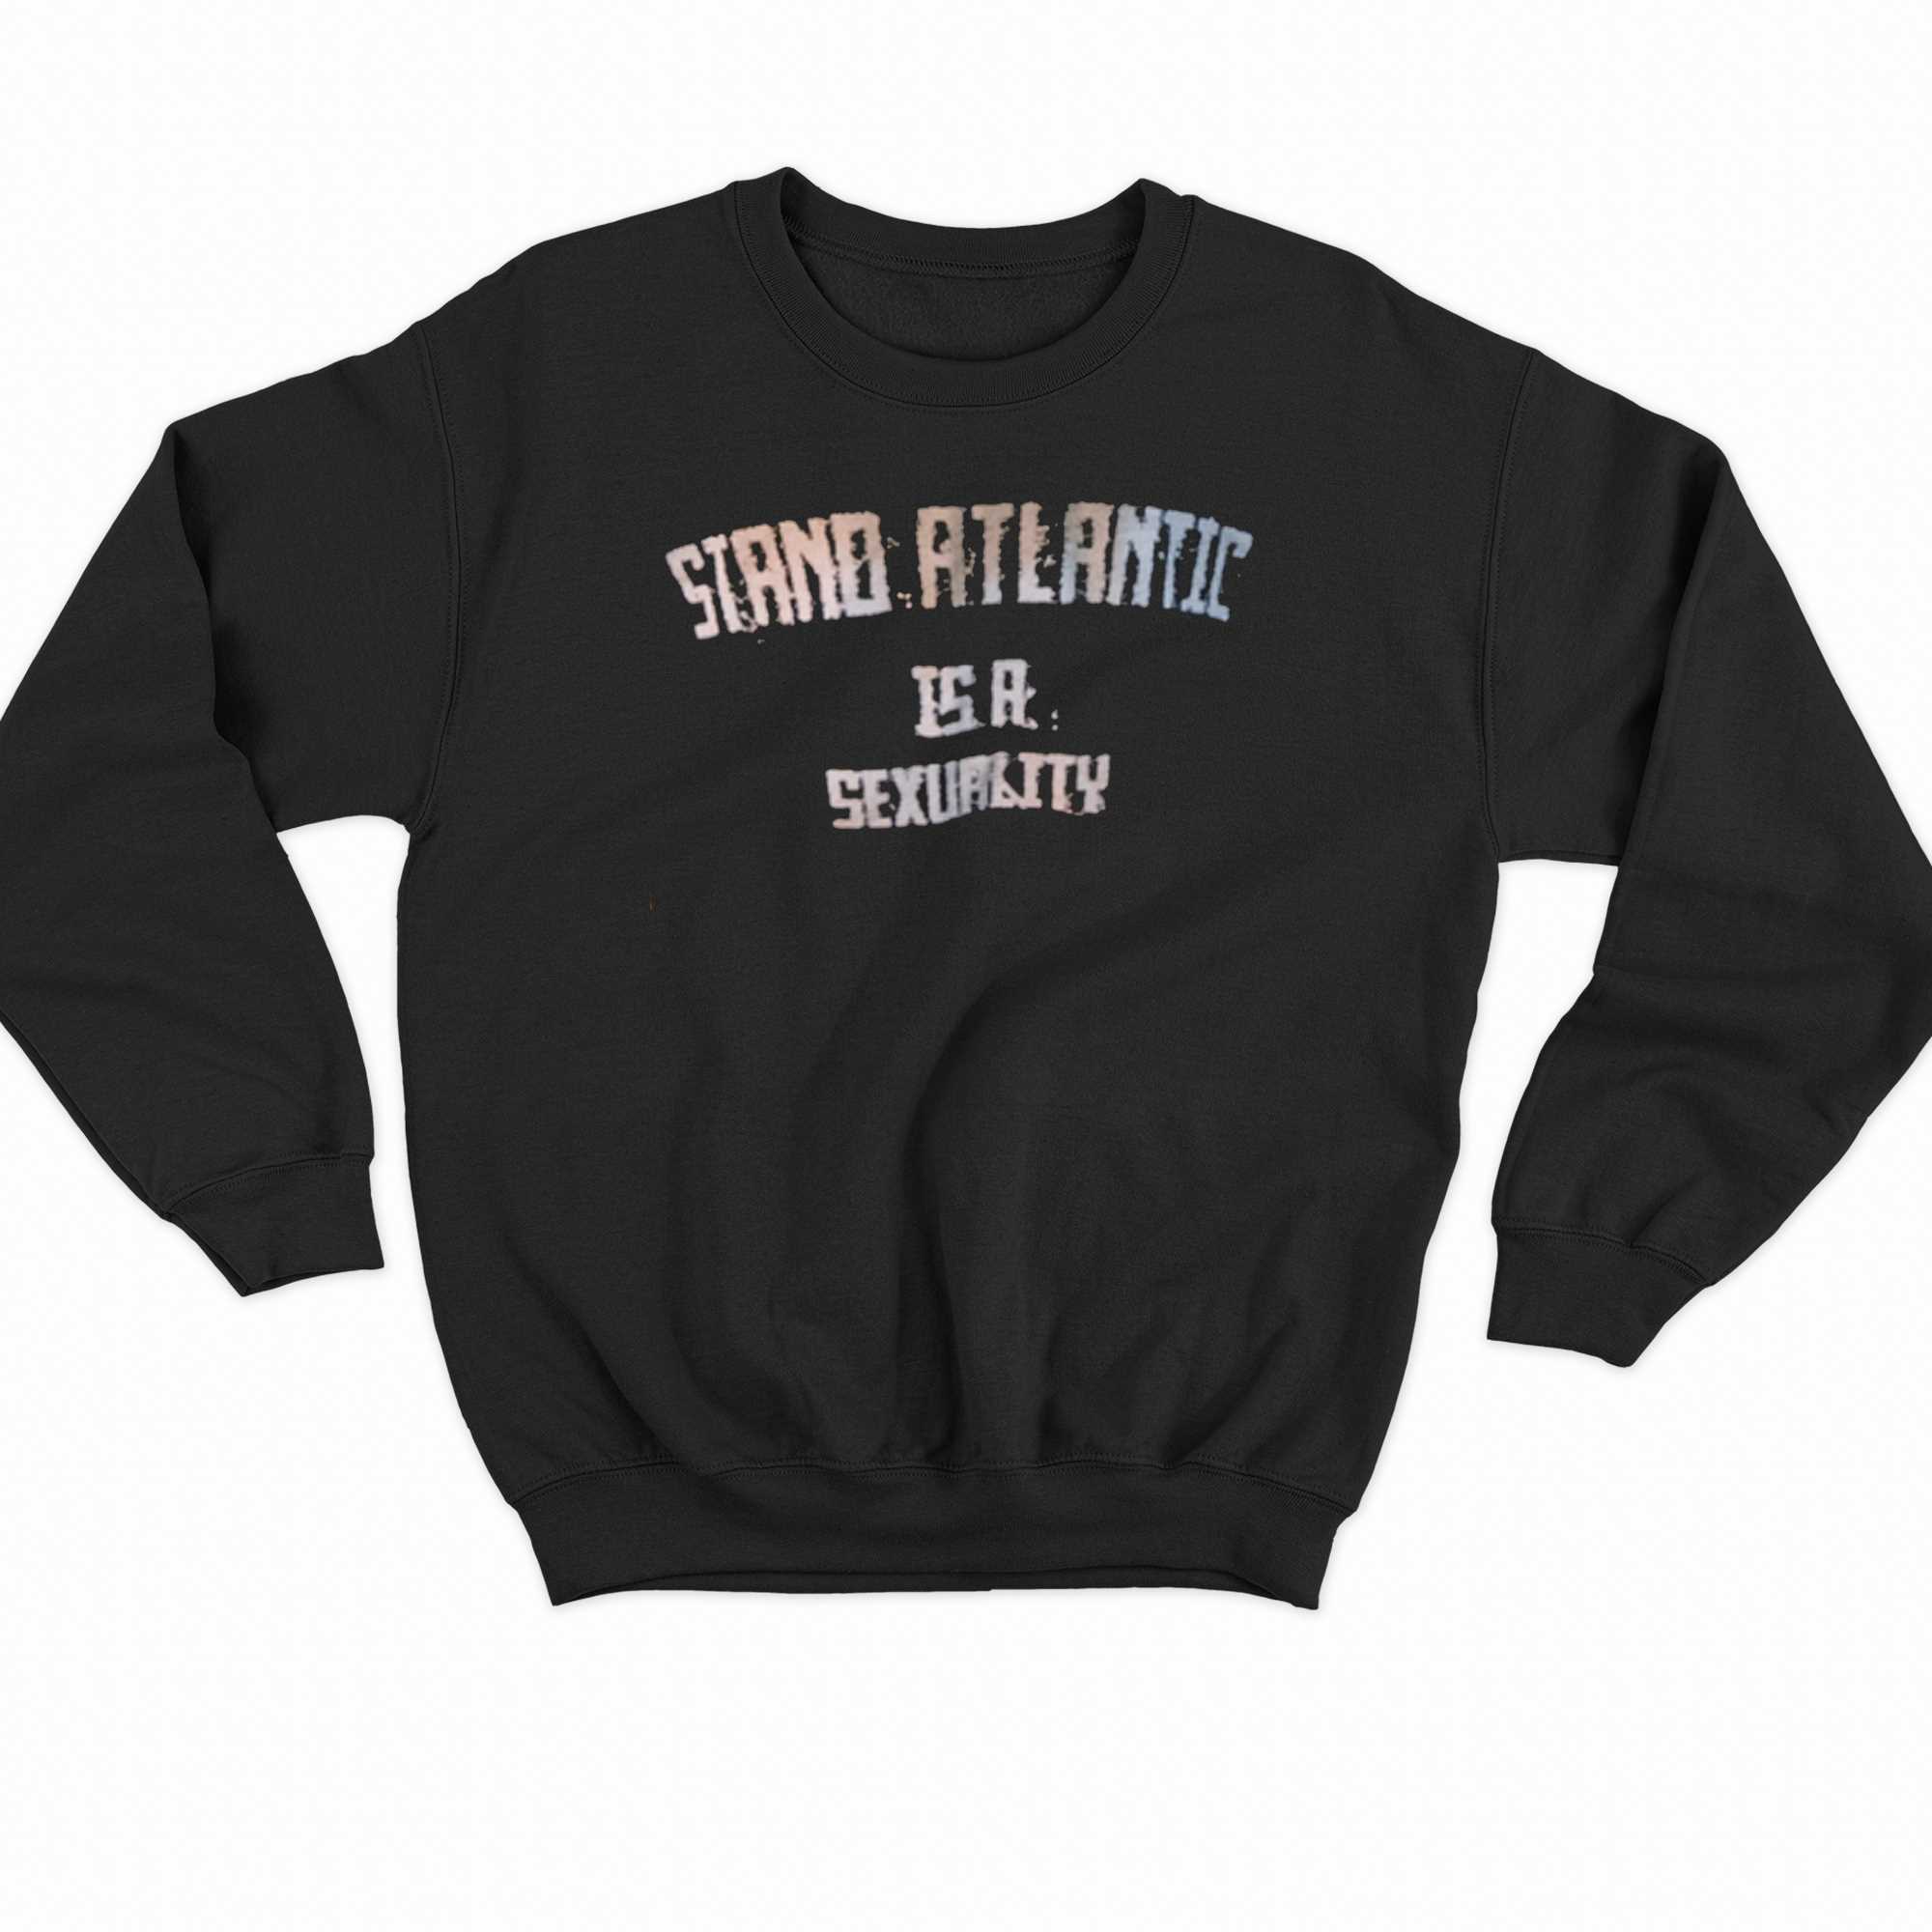 Stand Atlantic Is A Sexuality T-shirt 